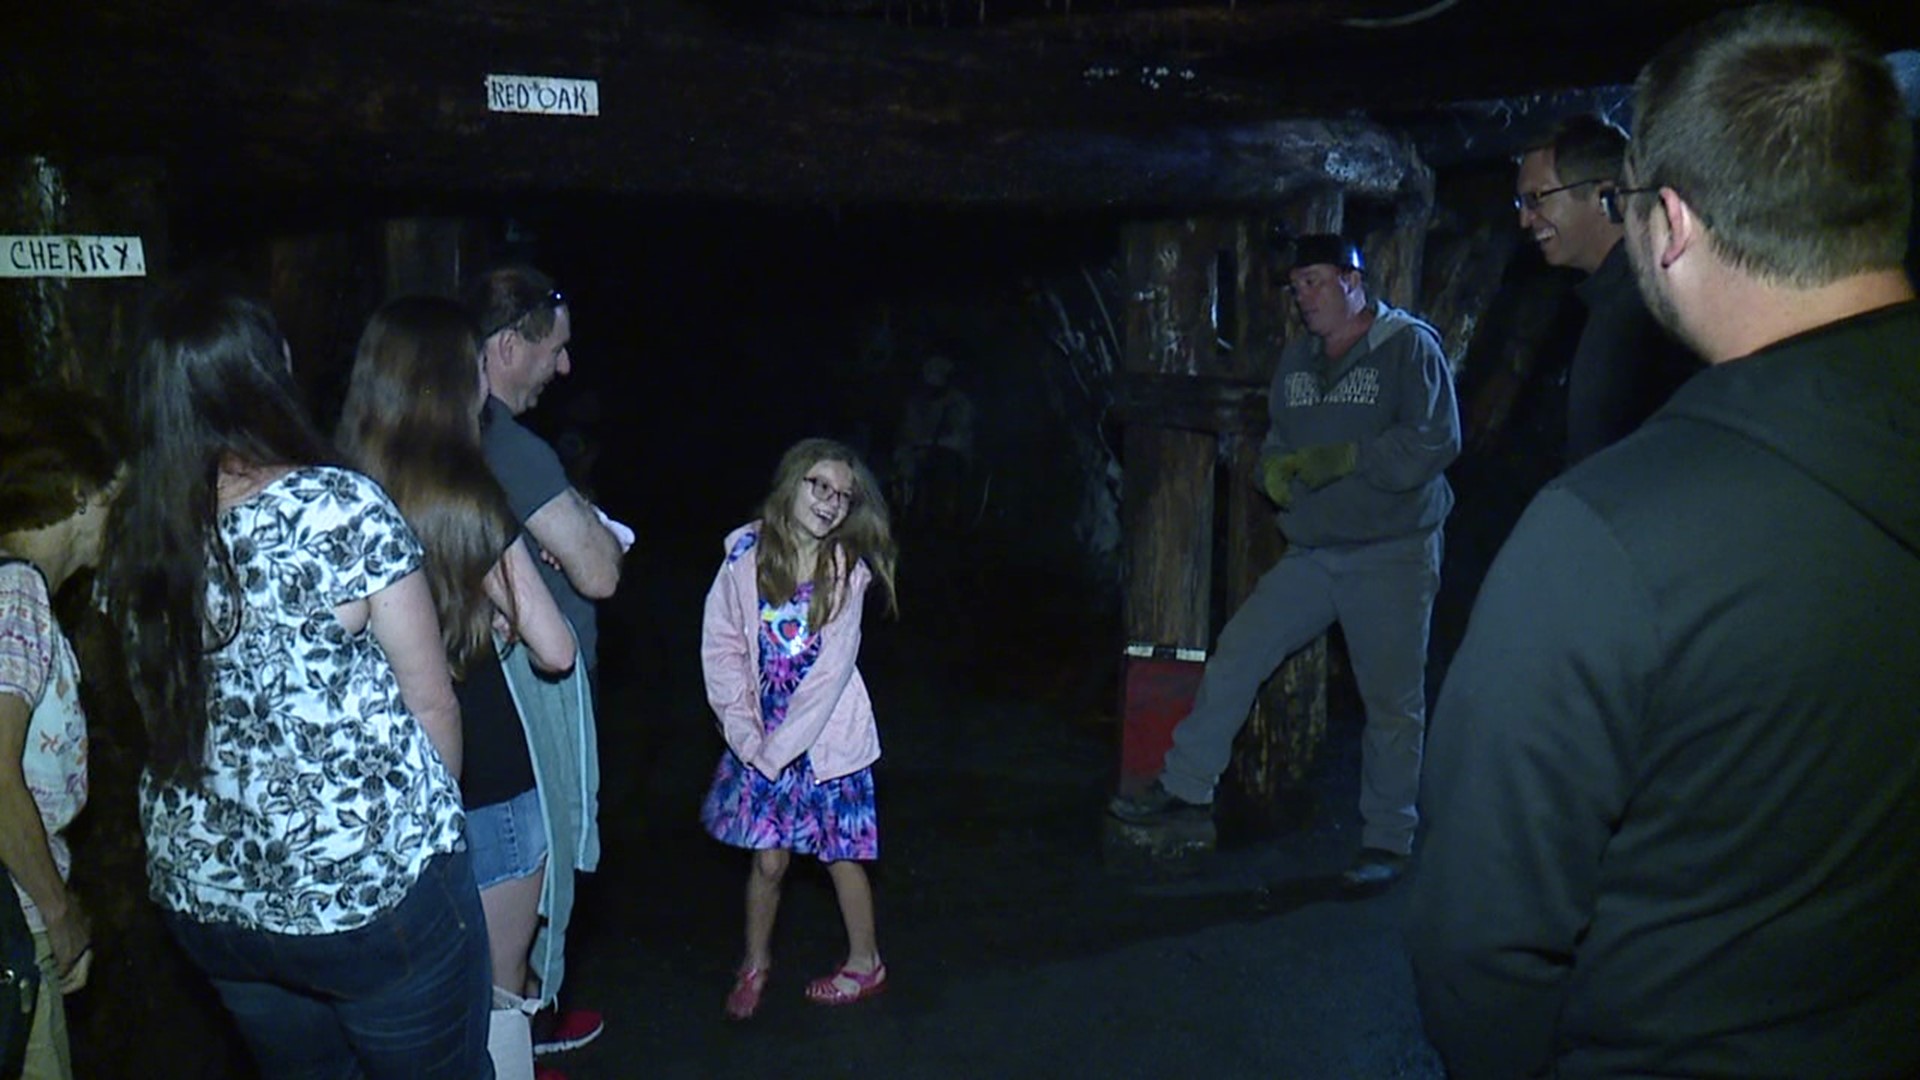 Leave the heat behind and ride the rails into the Pioneer Tunnel Coal Mine in Ashland.